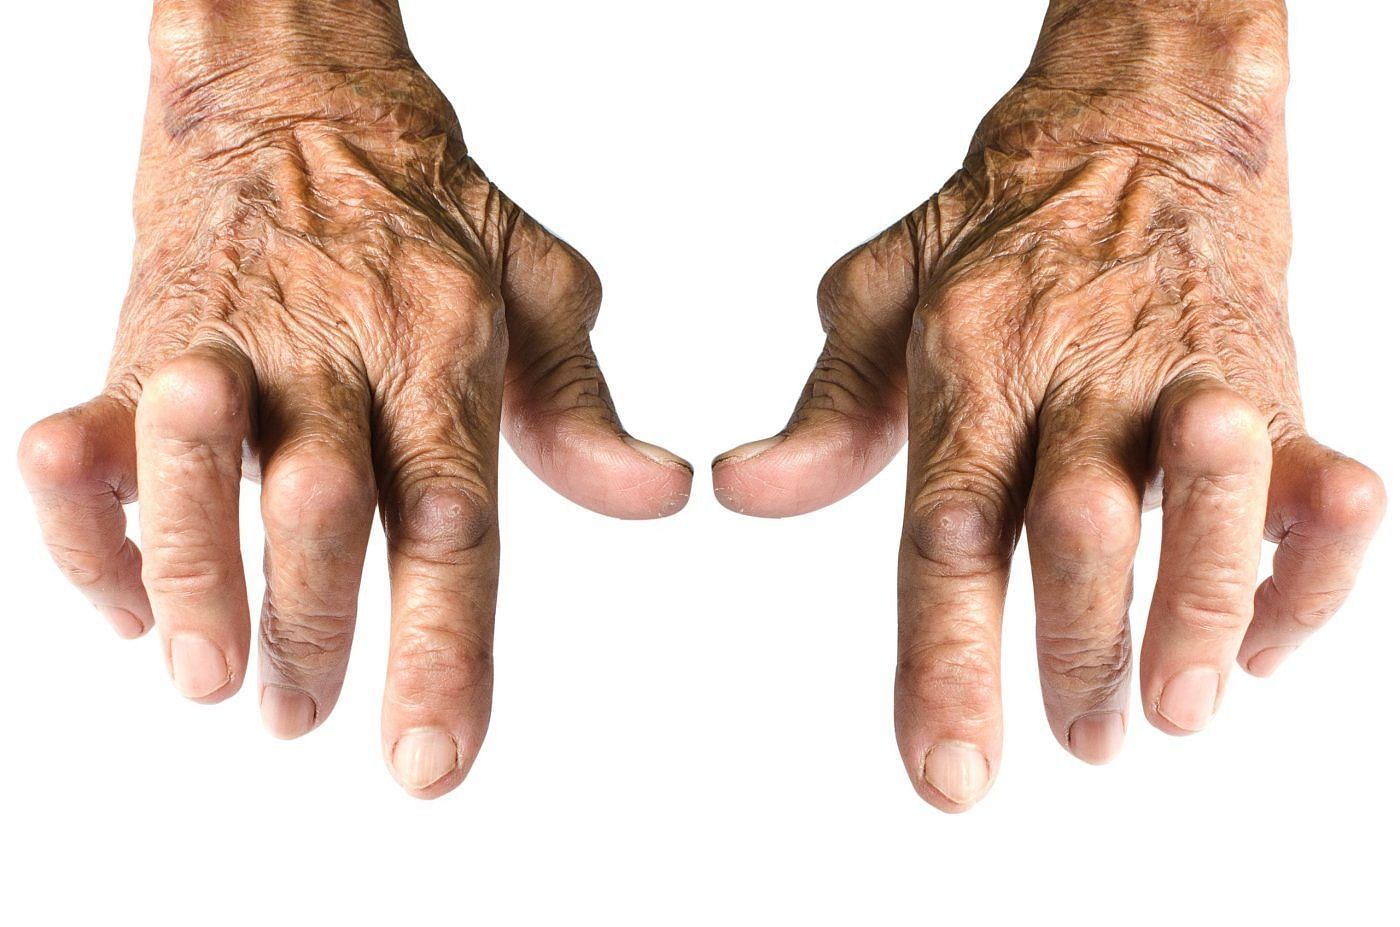 Human hands with the specific condition (Image via getty)